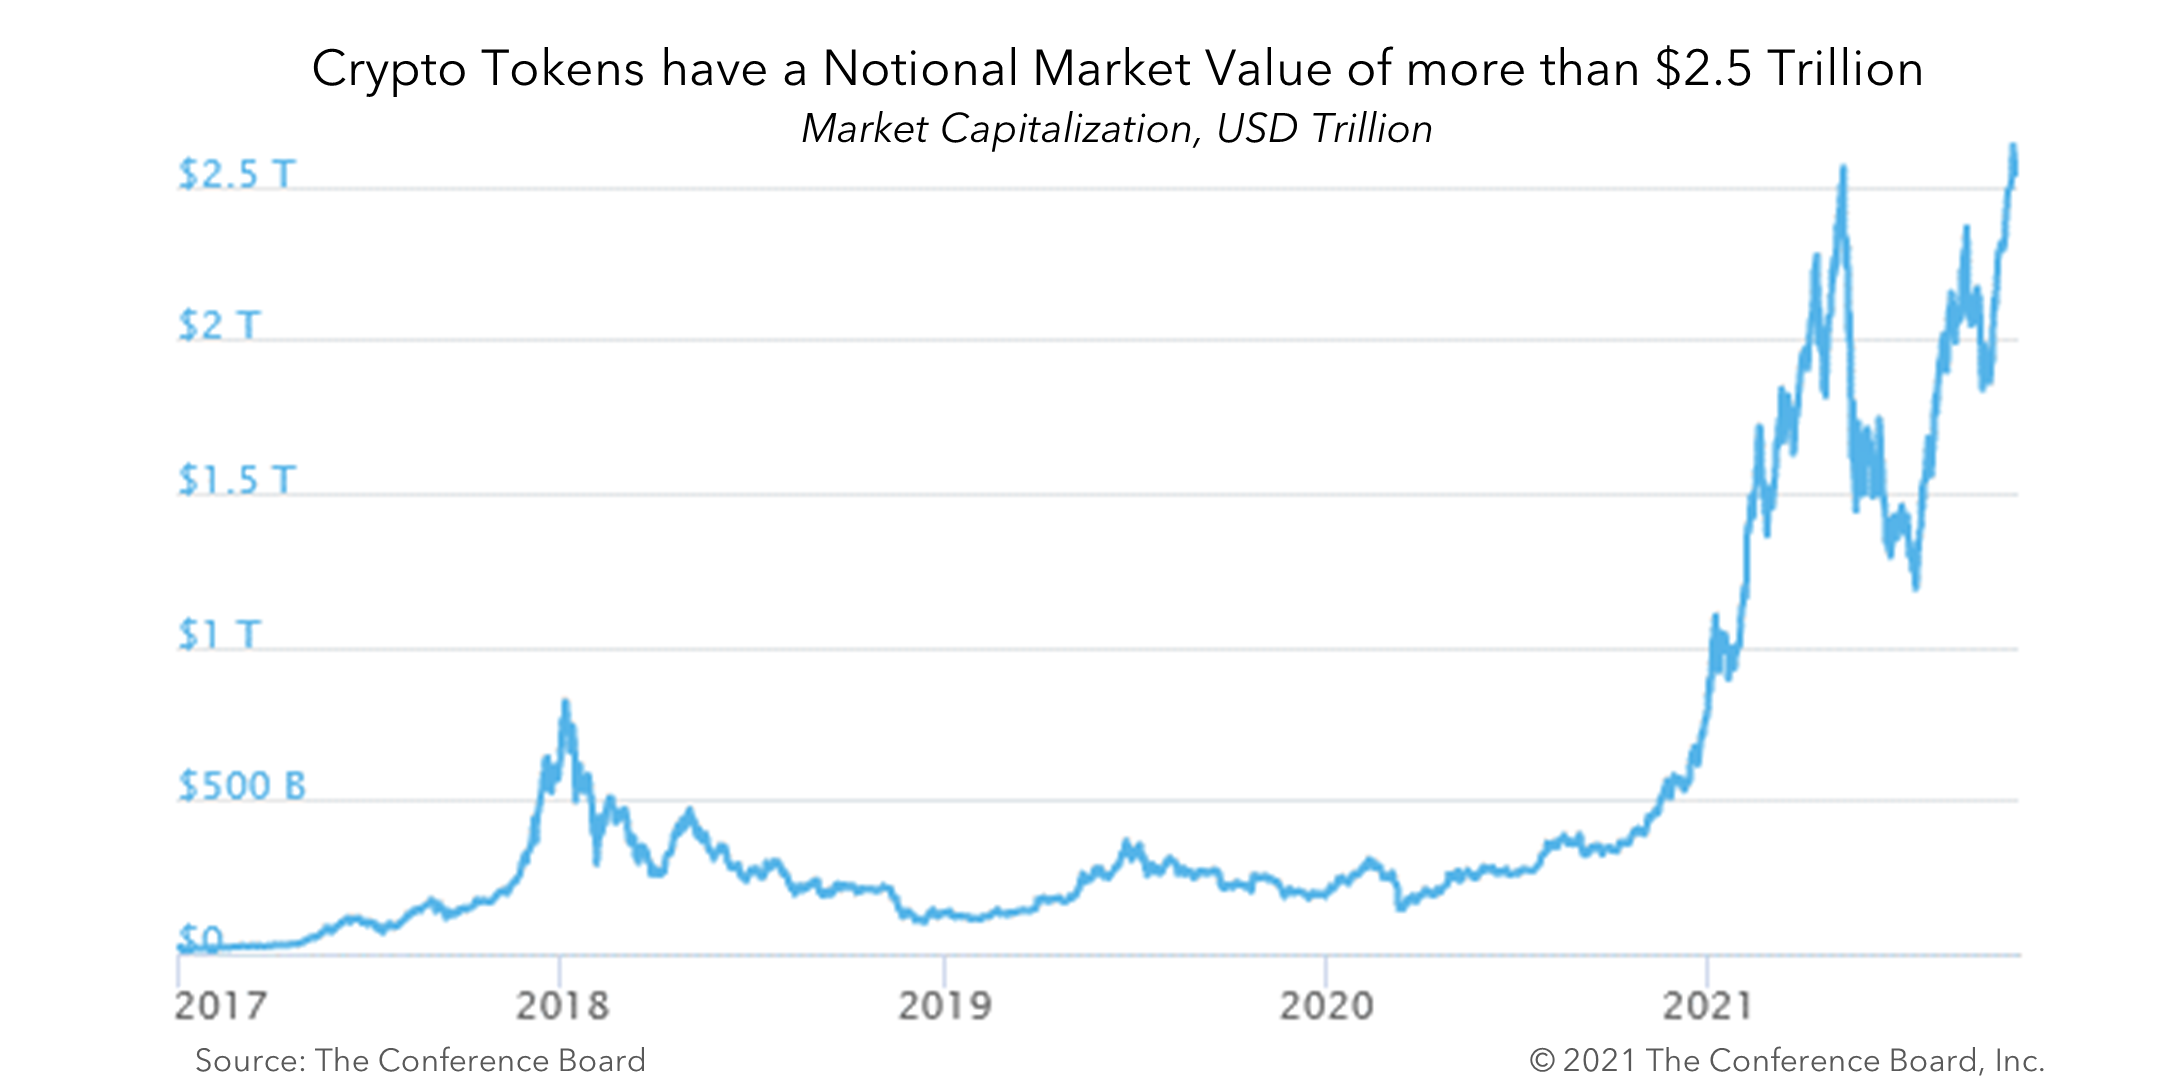 Crypto Tokens Have a Notional Market Value of More Than $2.5 Trillion